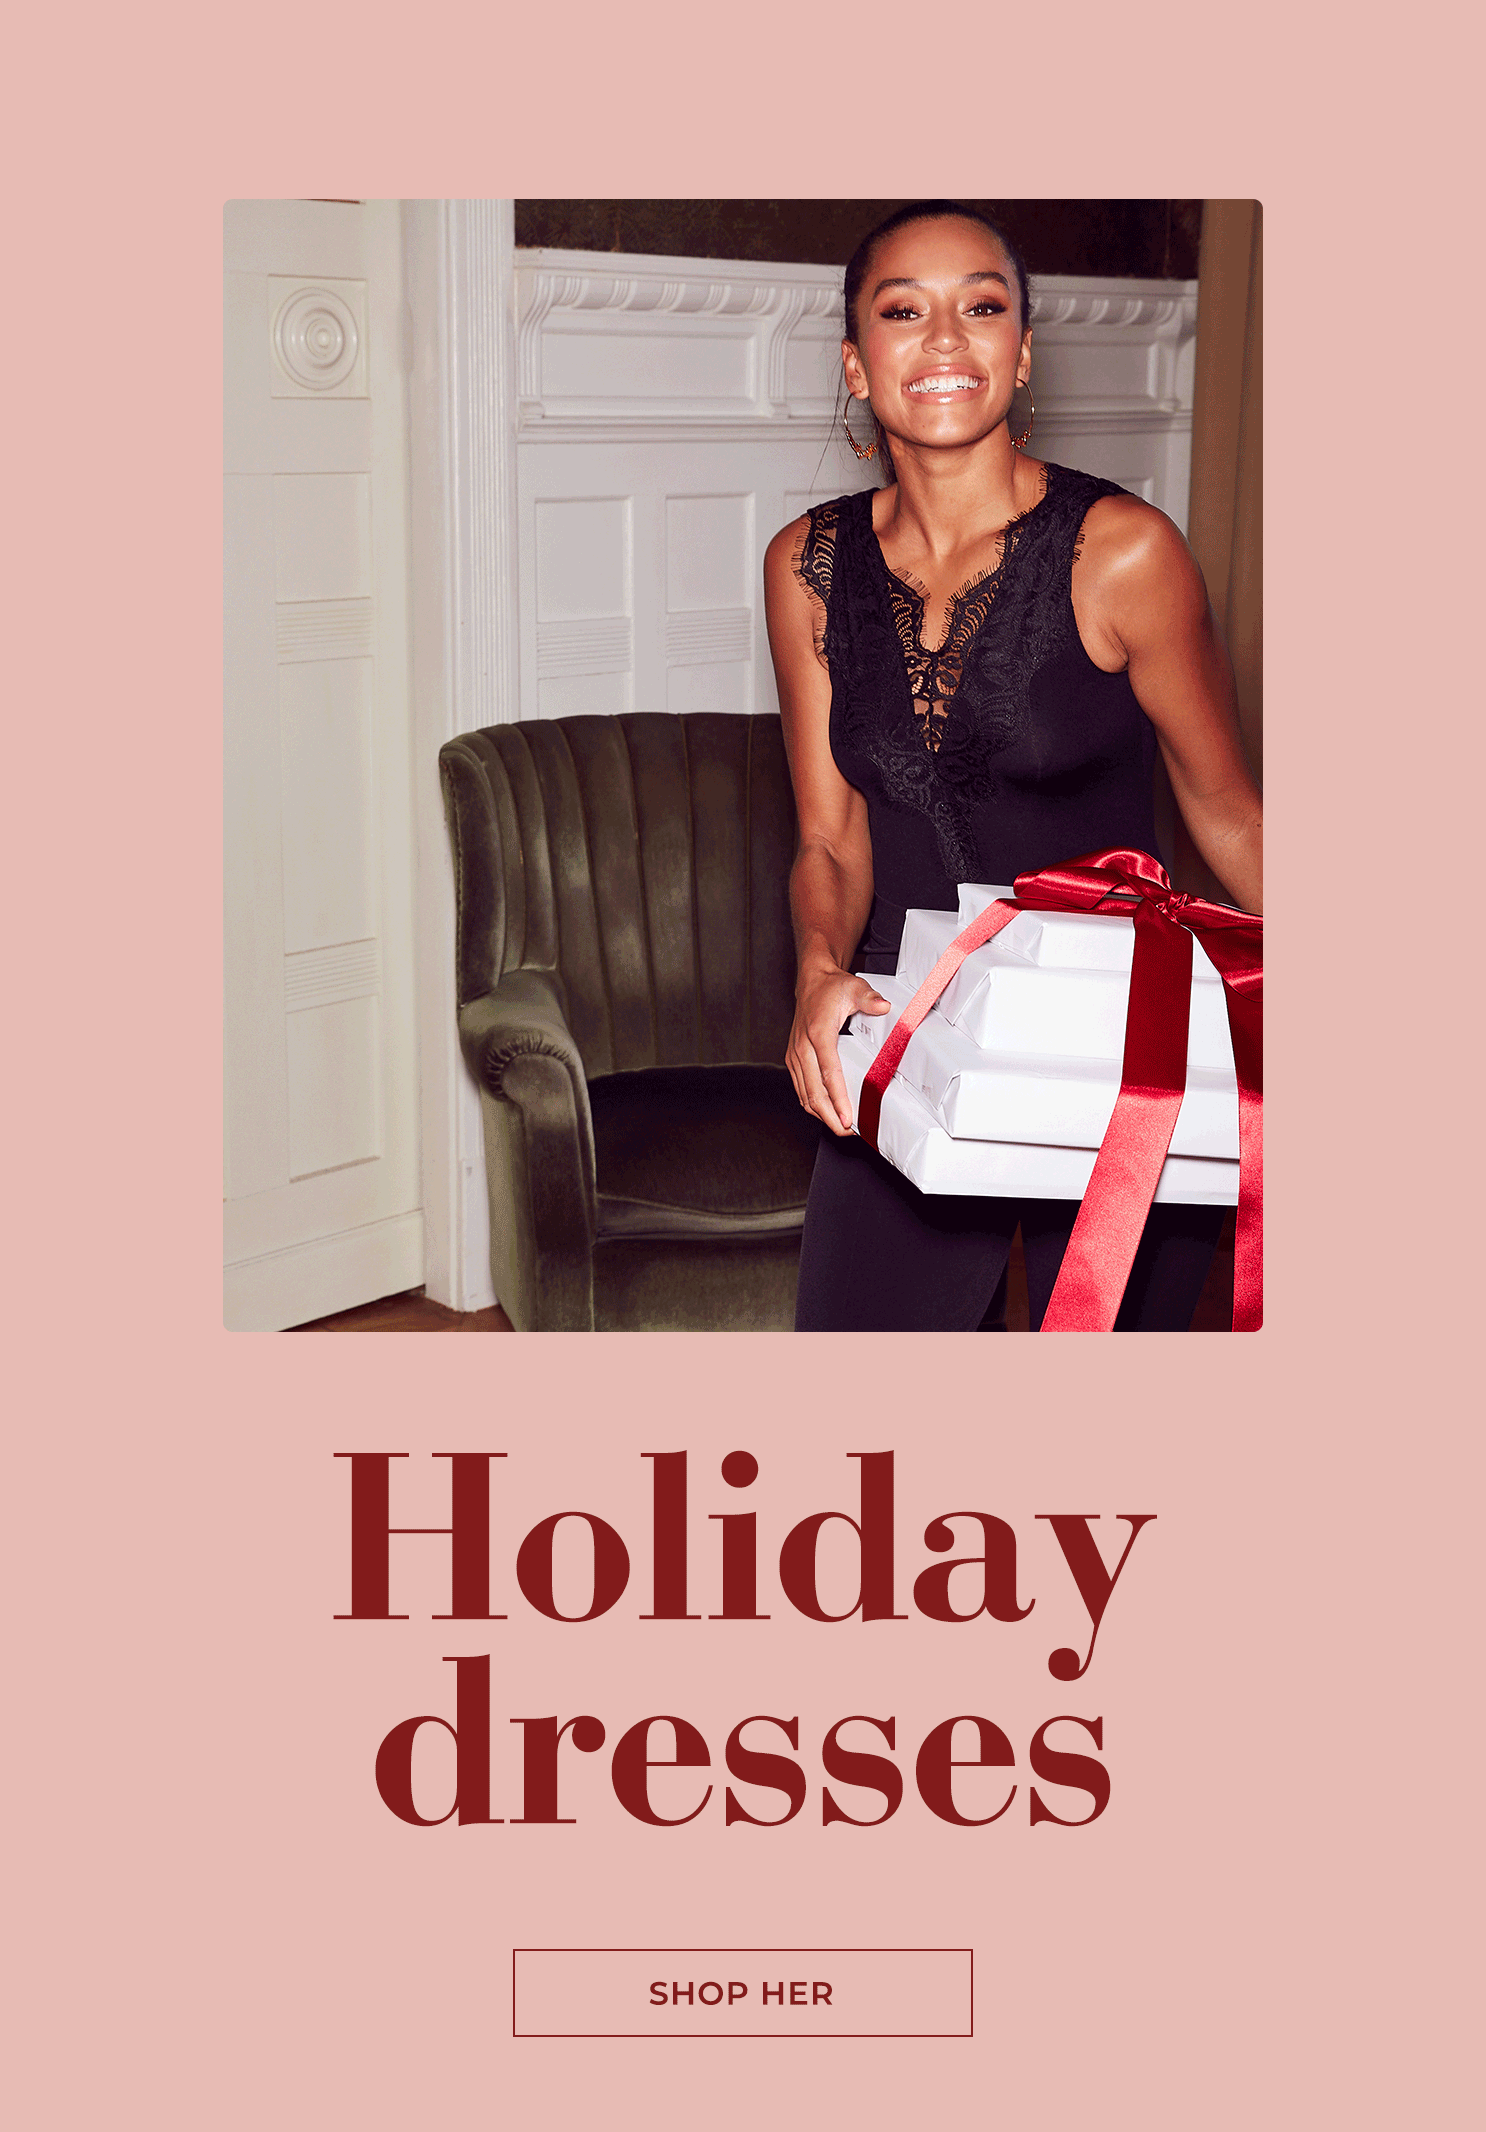 Holiday dresses - Shop her